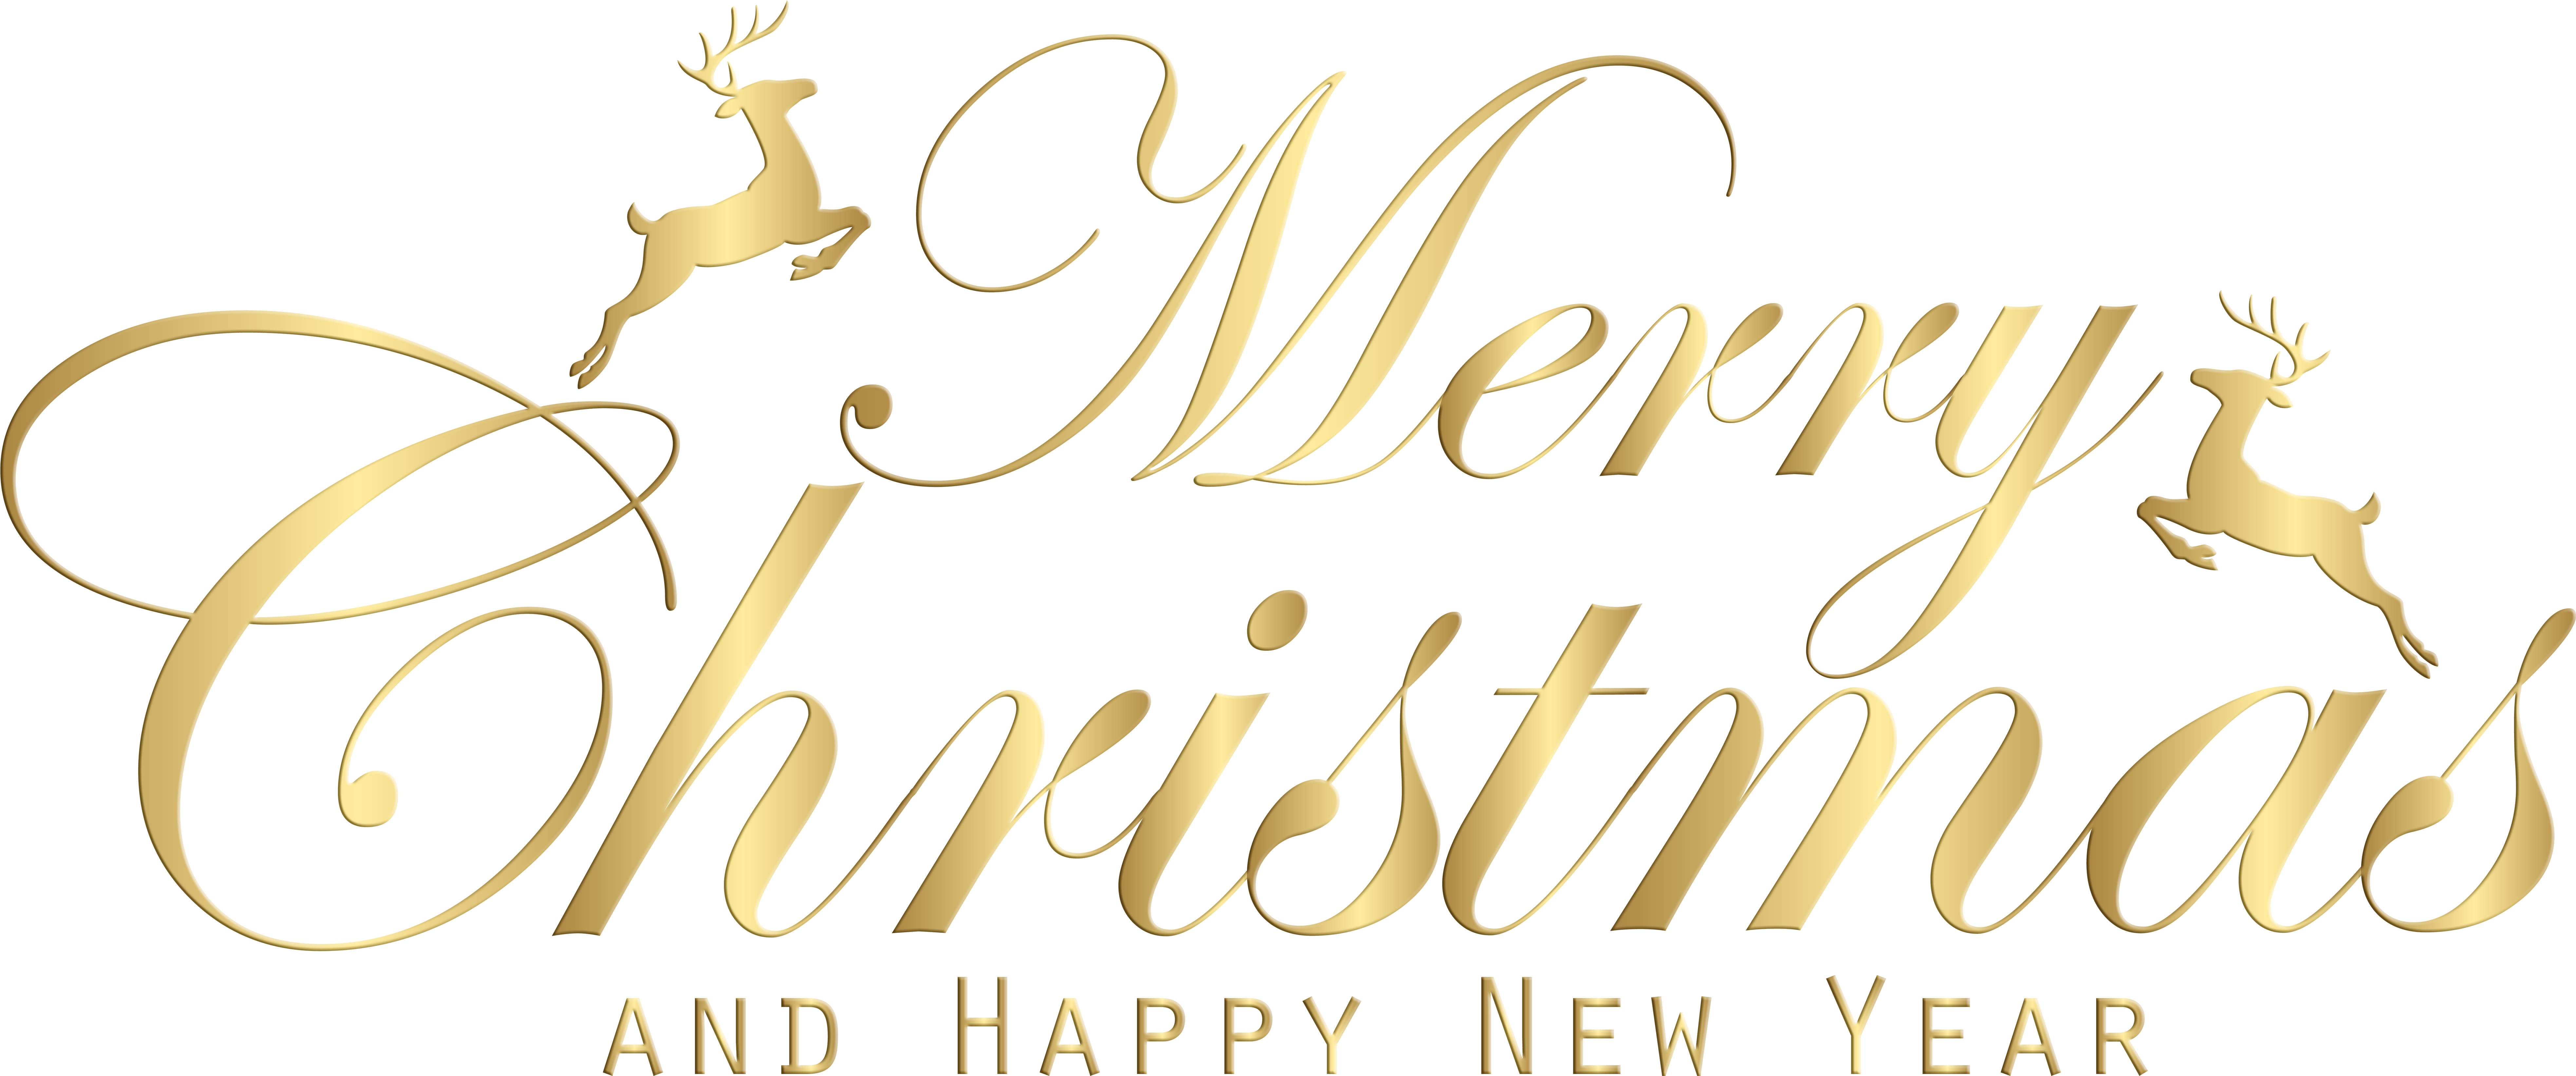 Golden Merry Christmasand Happy New Year Text PNG